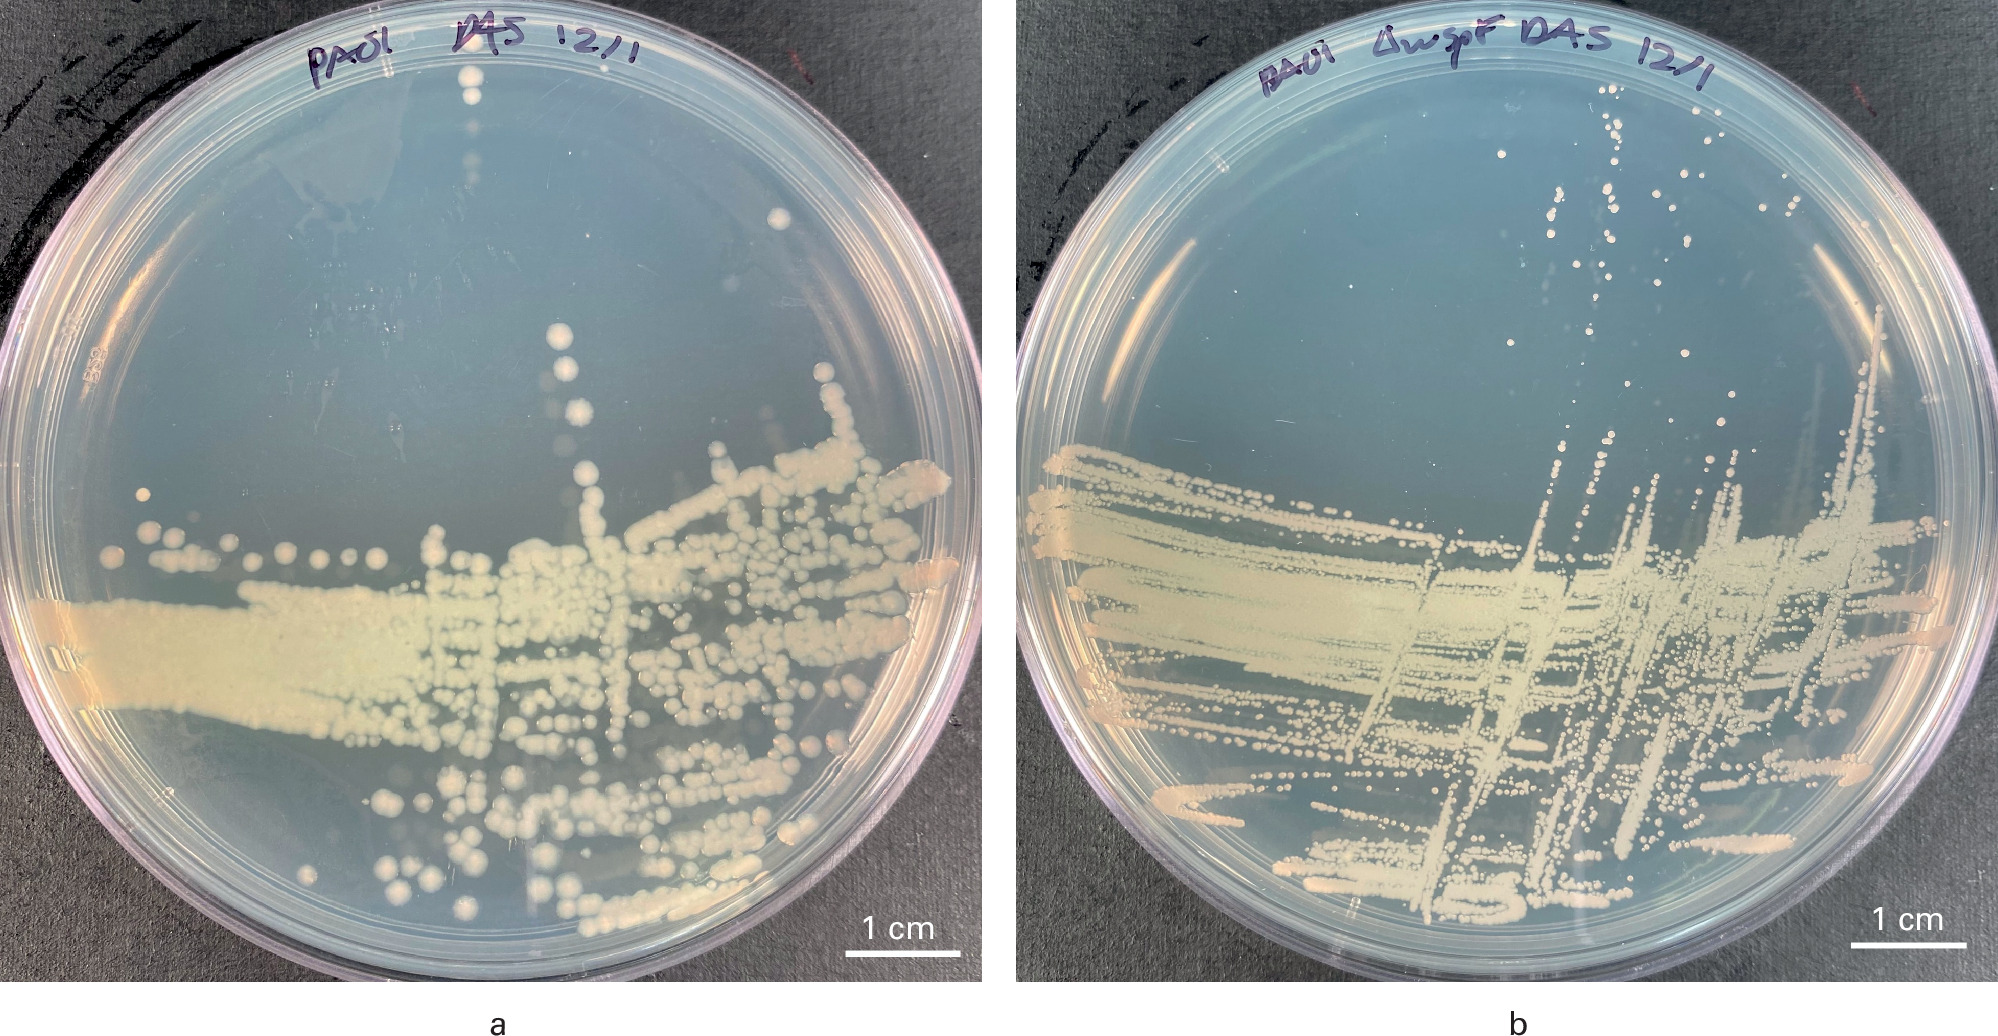 Fig. 1 
            Differences in morphotype wild-type and small colony variants (SCVs) of Pseudomonas aeruginosa. a) The Luria Broth (LB) agar plate shows large, round homogenous colonies of wild-type P. aeruginosa. b) The LB agar plate shows very small, pinpoint SVCs.
          